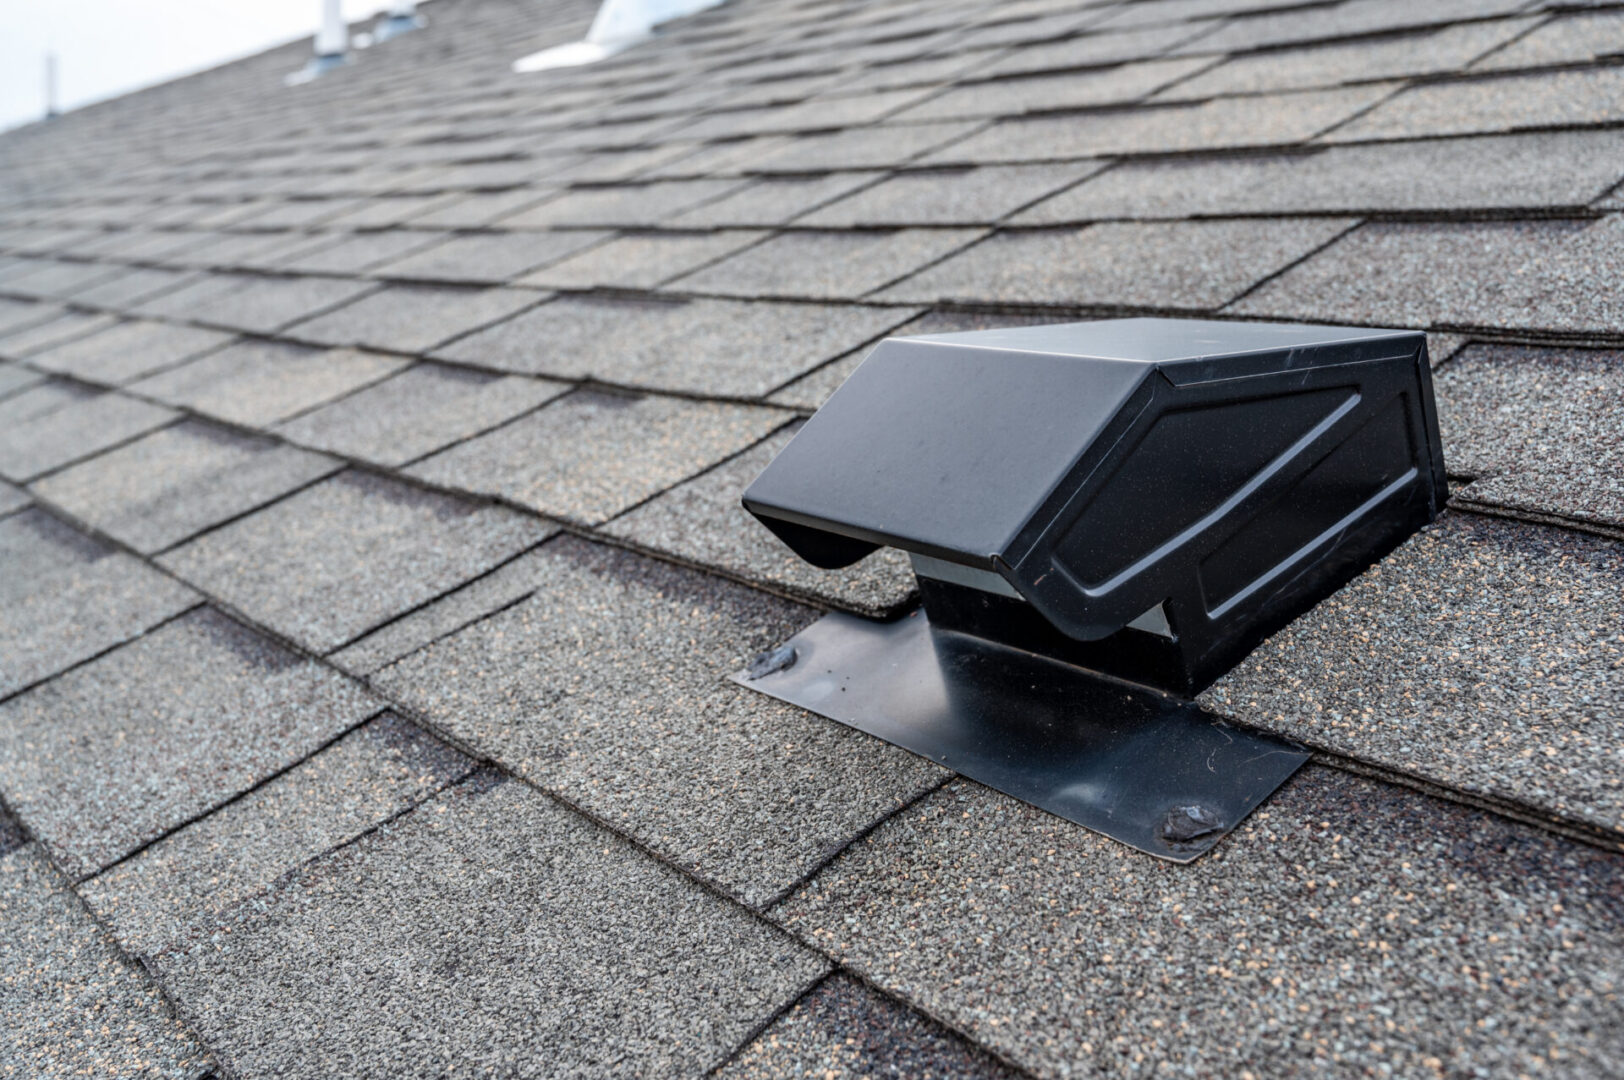 A repaired or replaced roof in the Folsom, CA area with Lucero’s Roofing